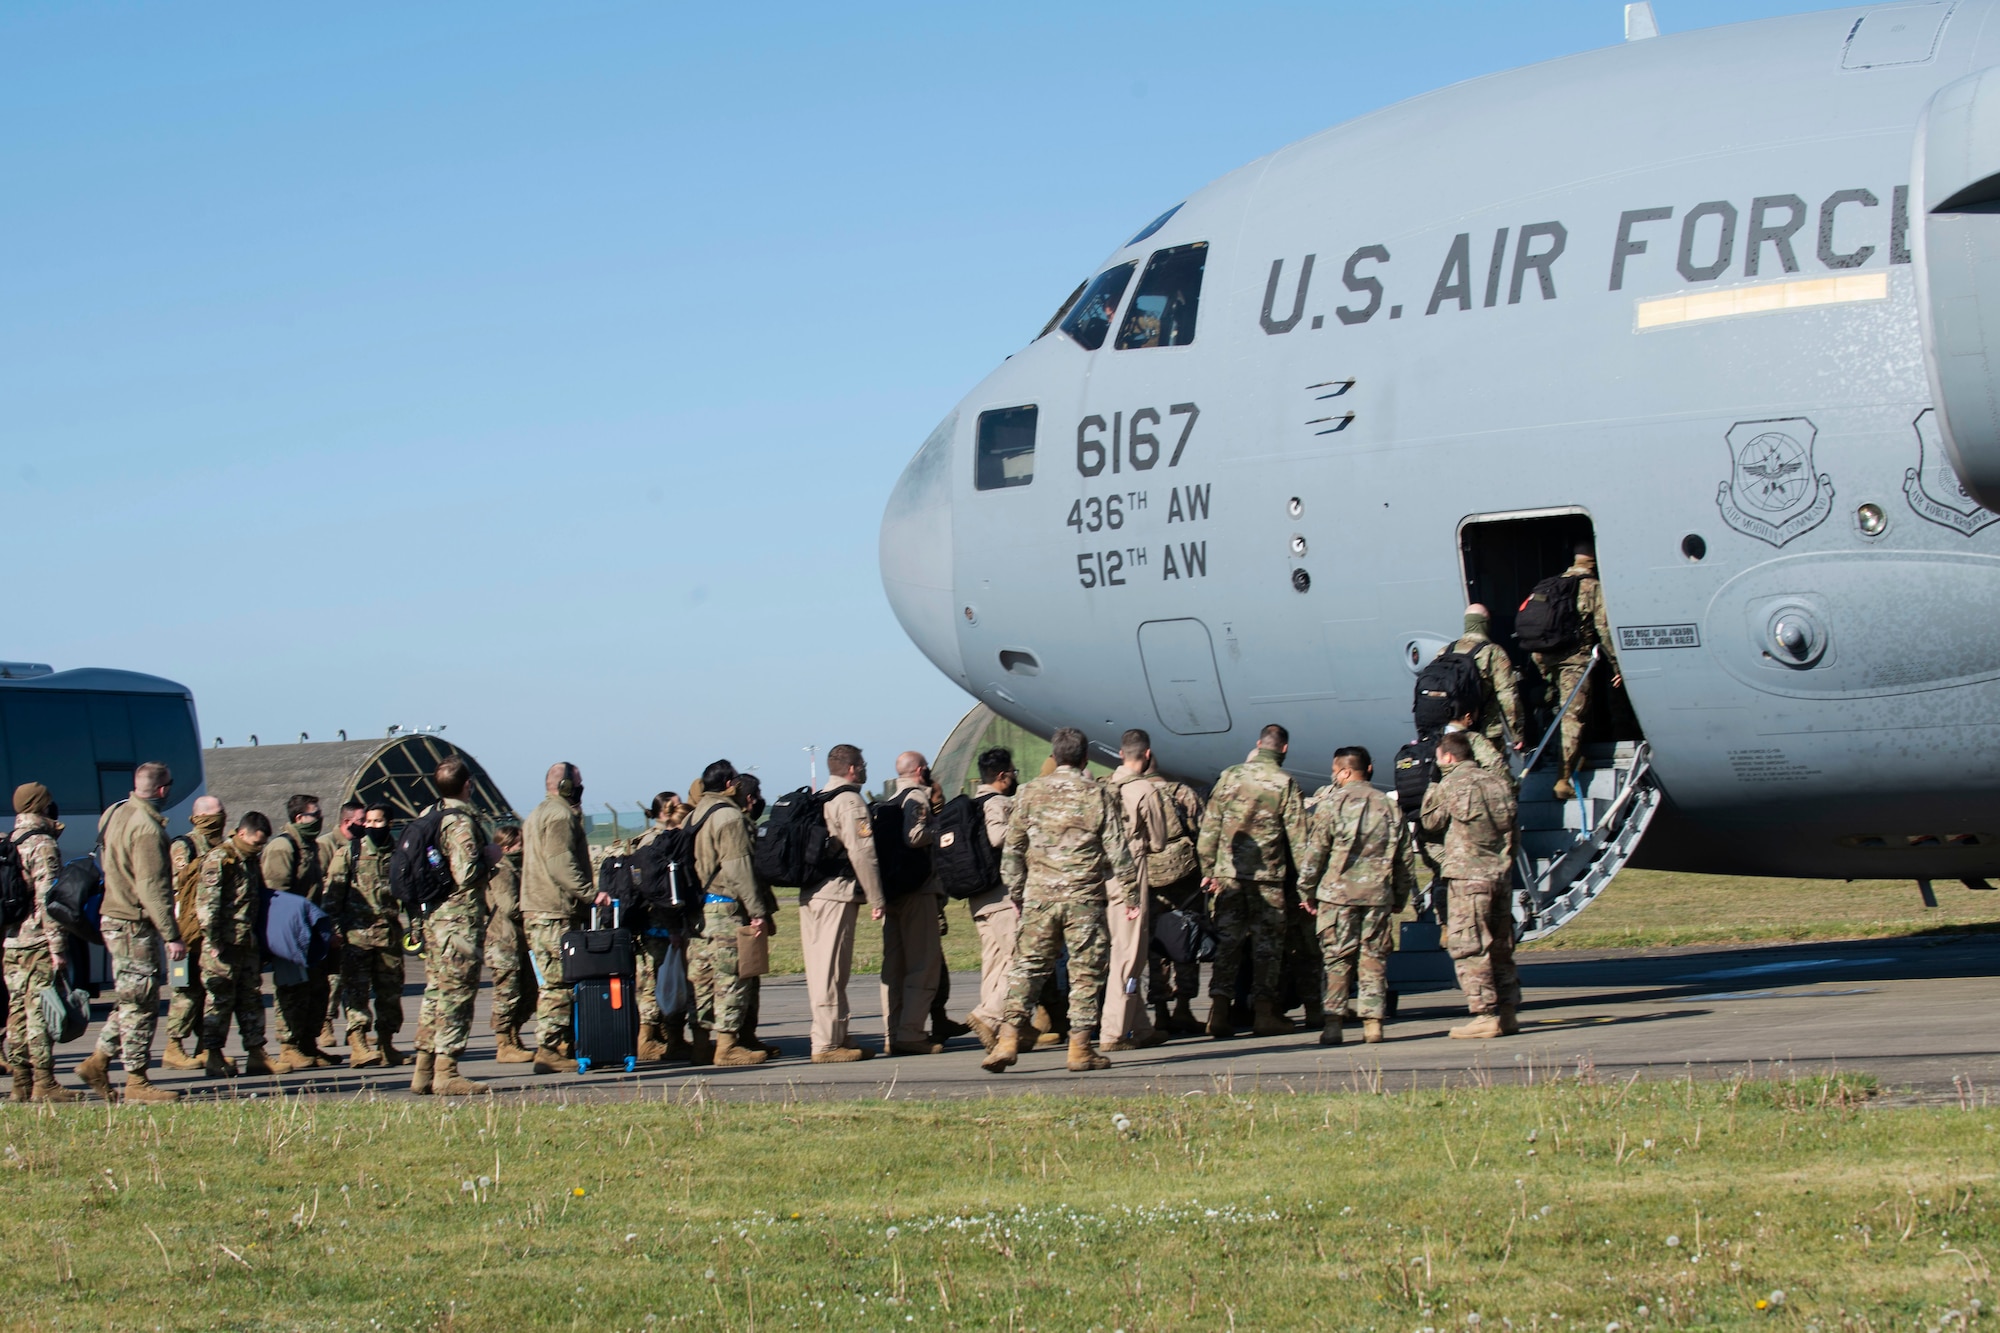 48th Fighter Wing Airmen board a C-17 Globemaster III from Dover Air Force Base, Delaware, in preparation for a deployment from Royal Air Force Lakenheath, England, May 6, 2020. The 492nd Fighter Squadron is the first fighter squadron from the Liberty Wing to deploy since the start of the COVID-19 pandemic. (U.S. Air Force photo by Senior Airman Christopher S. Sparks)